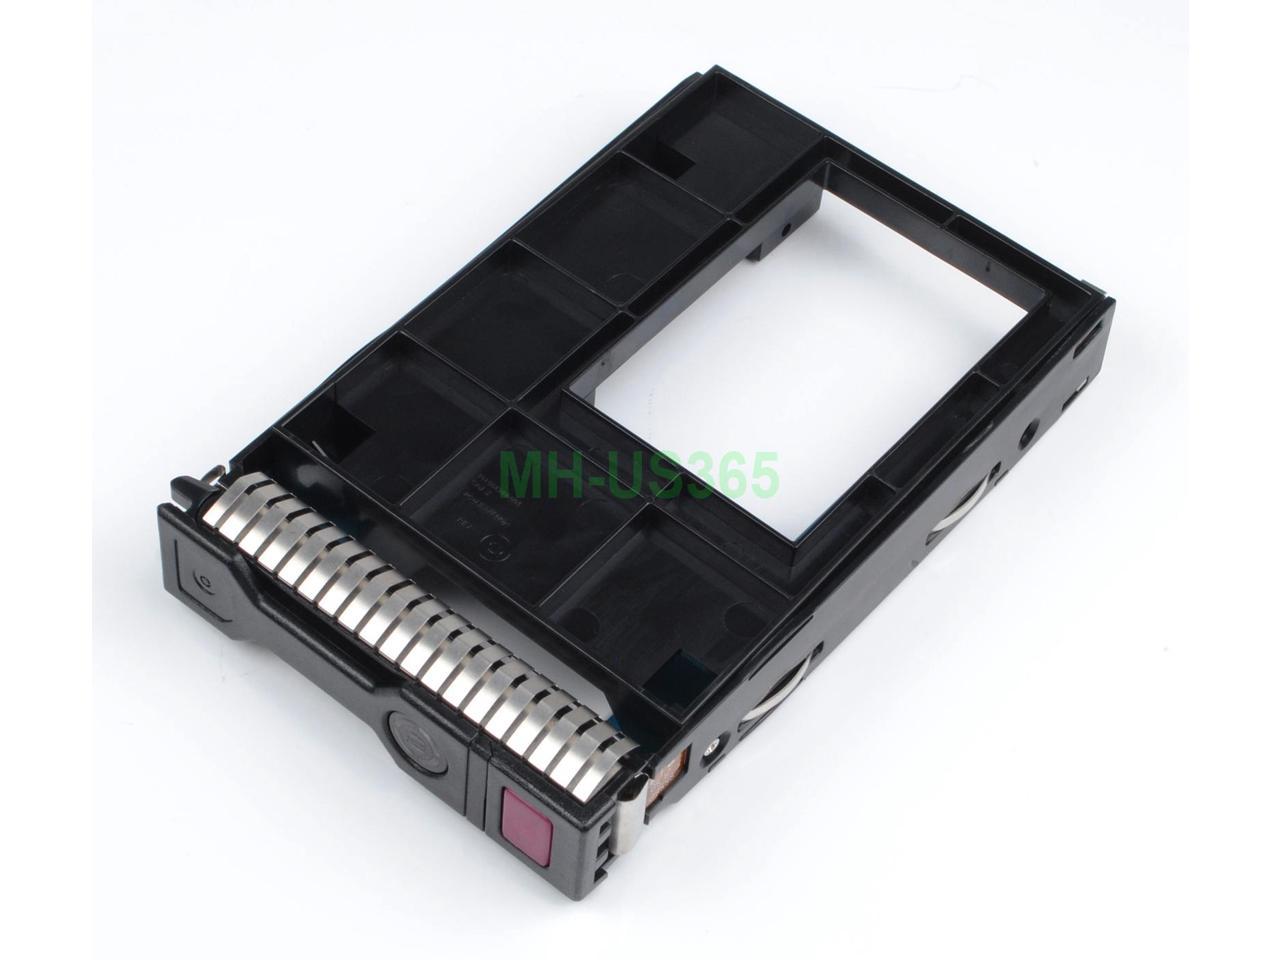 hp 651314-001+661914-001 2.5" to 3.5" HDD Converter Tray Caddy for HP  G8/G9 USA